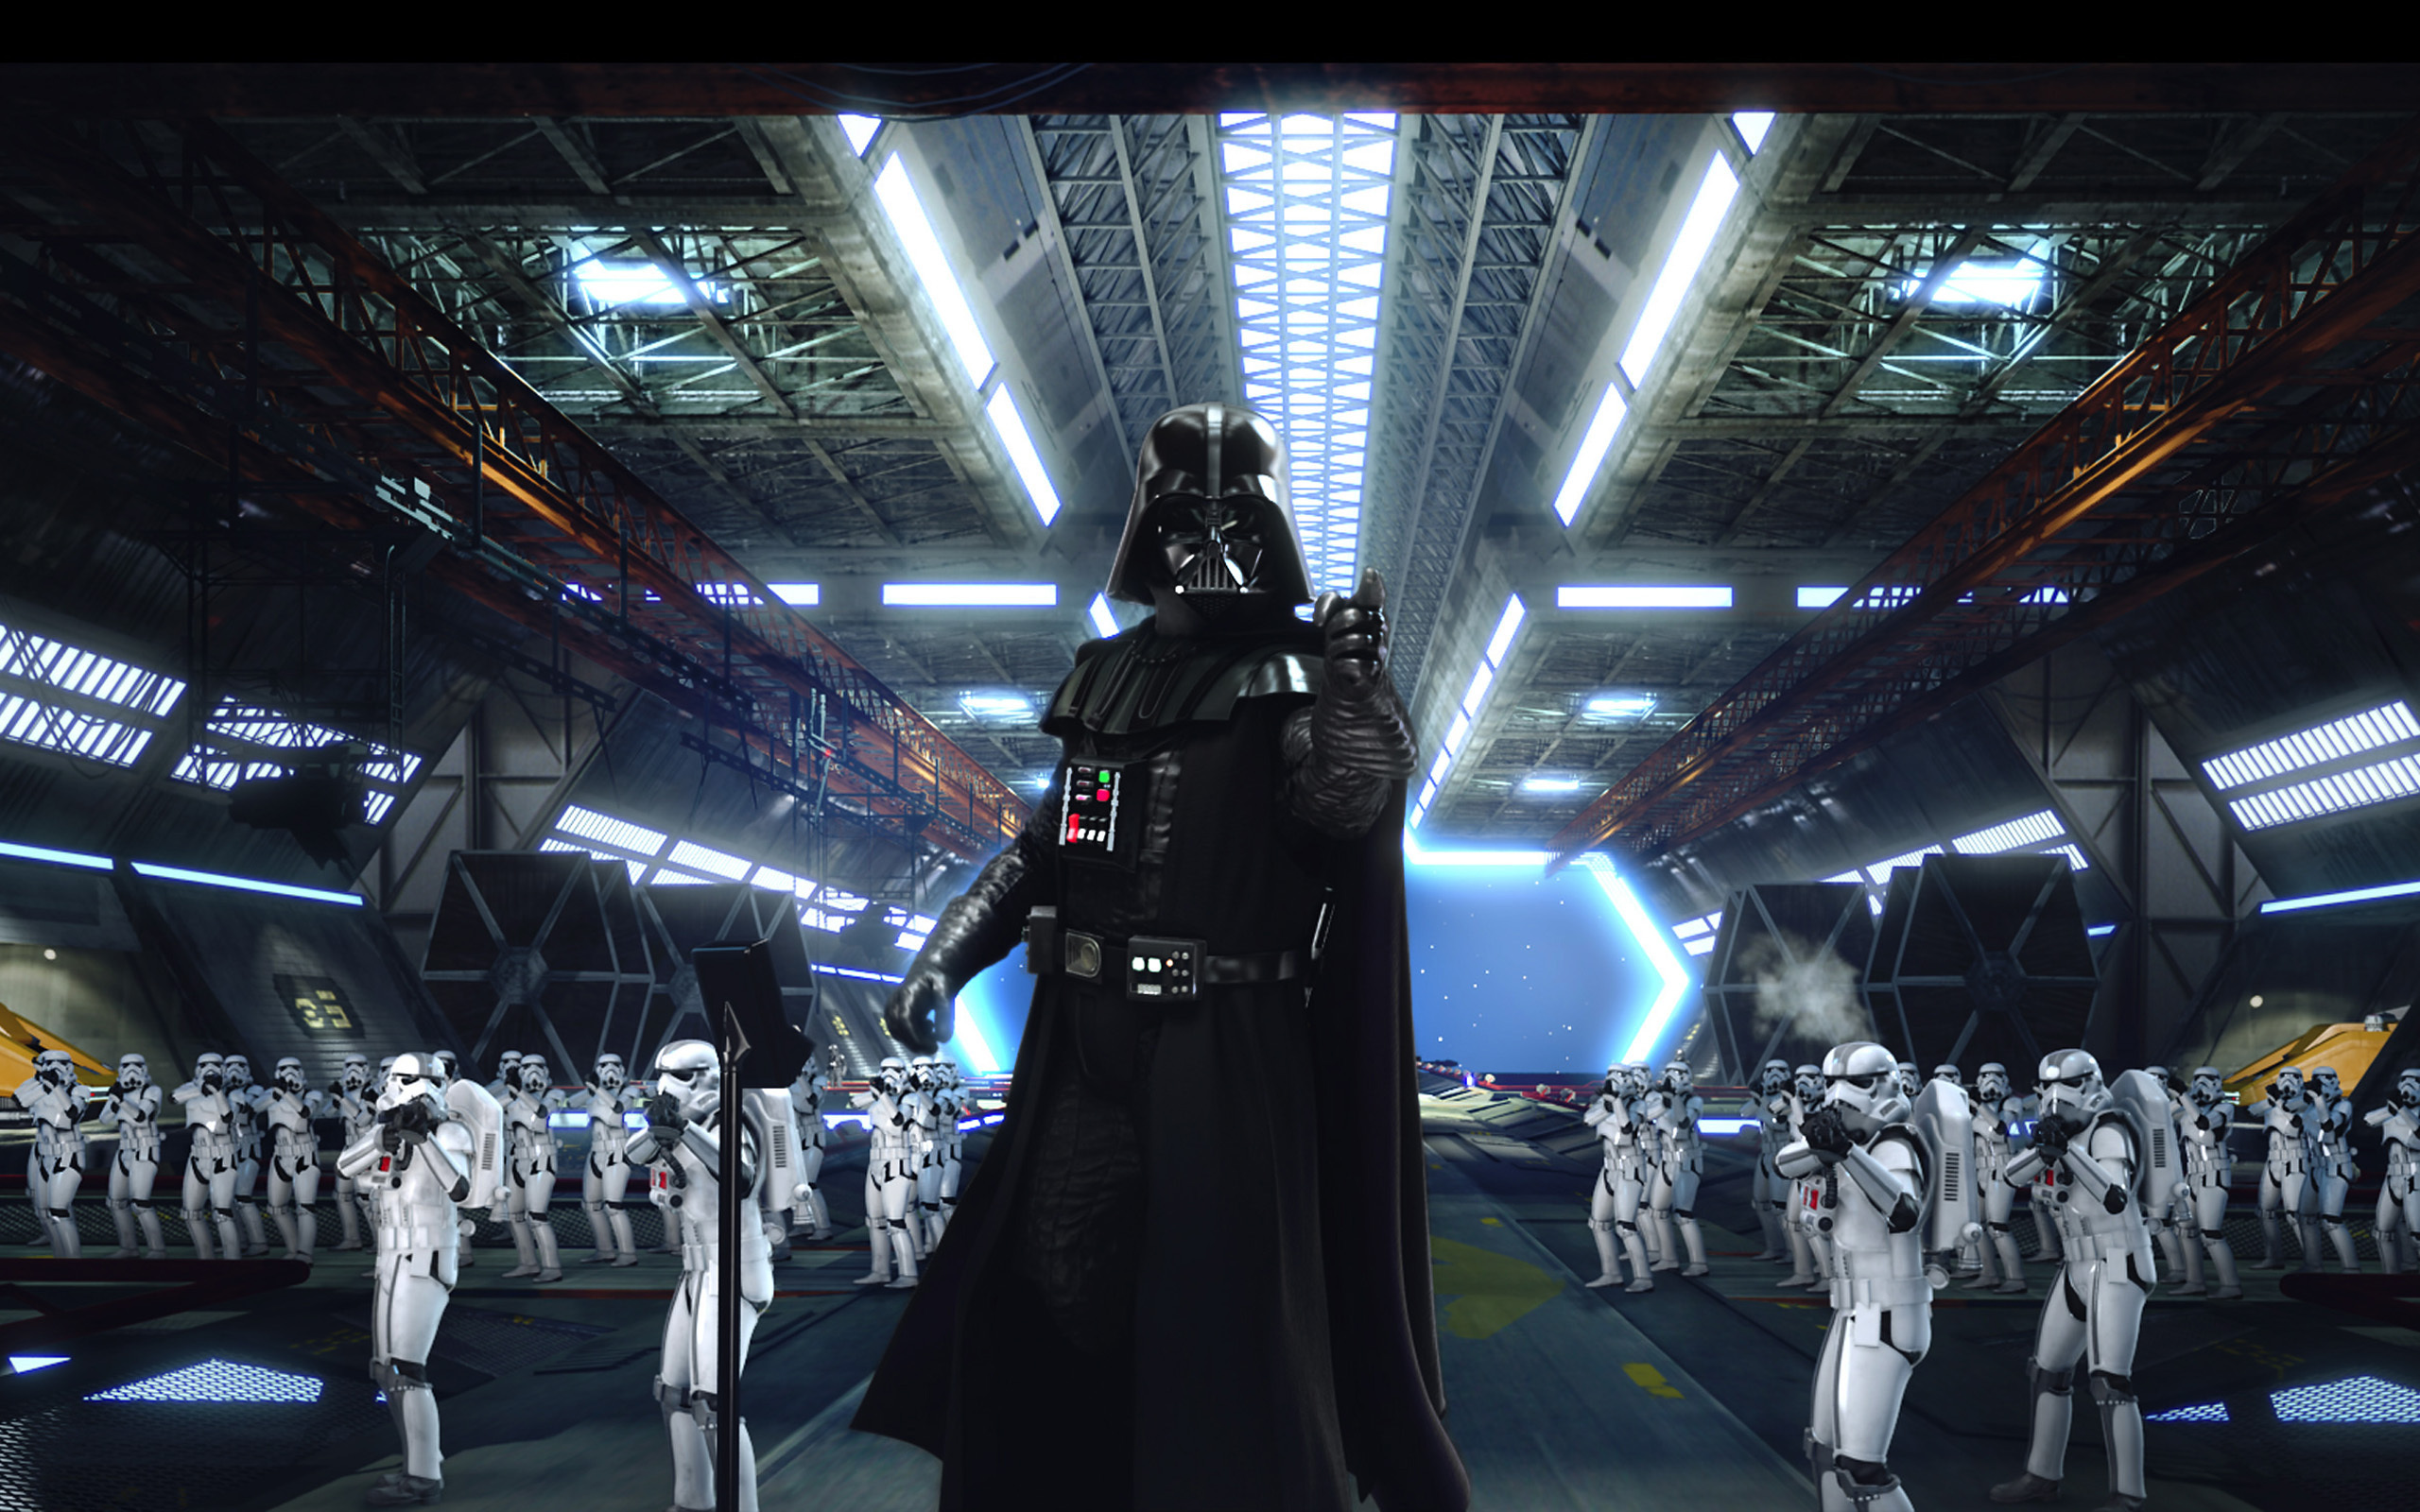  wallpaper x darth vader wallpapers download backgrounds